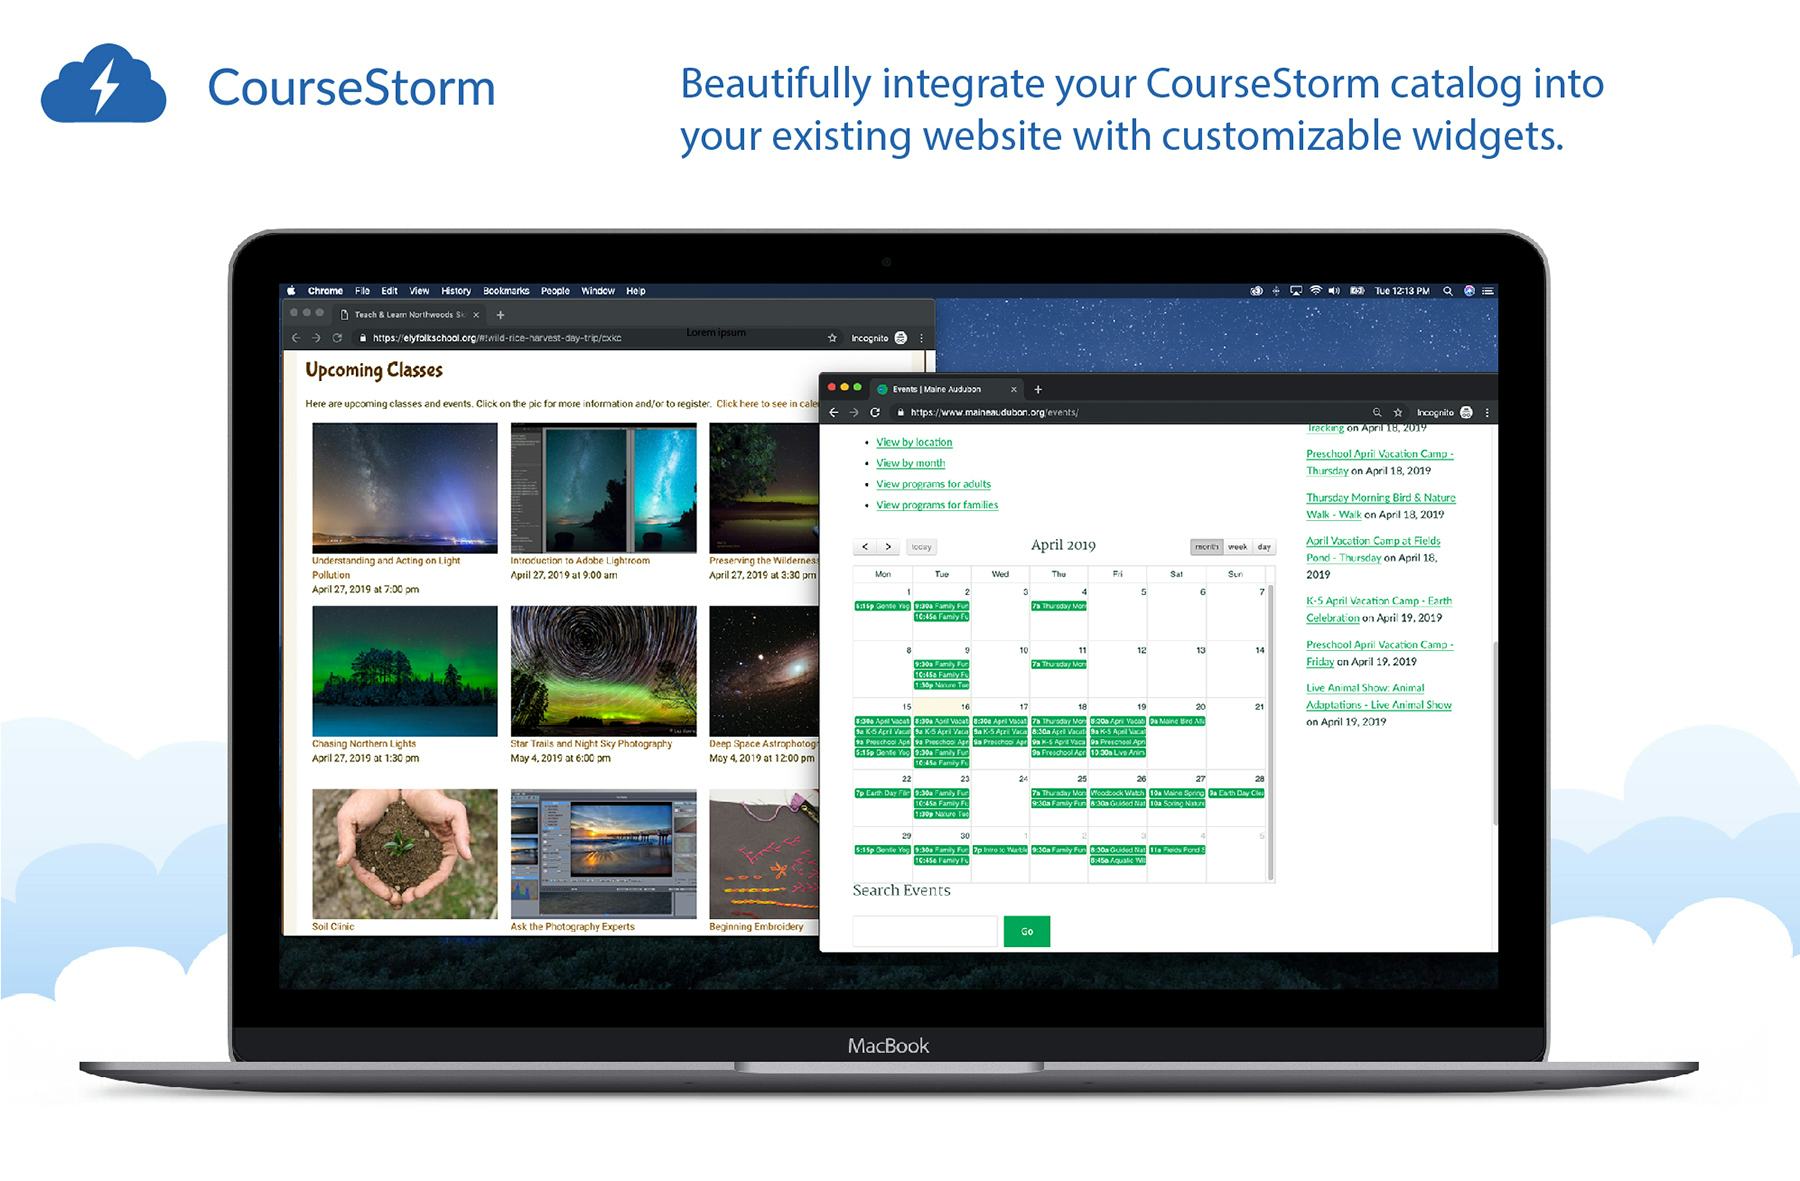 CourseStorm Software - Beautifully integrate your CourseStorm catalog into your existing website with our customizable widgets.